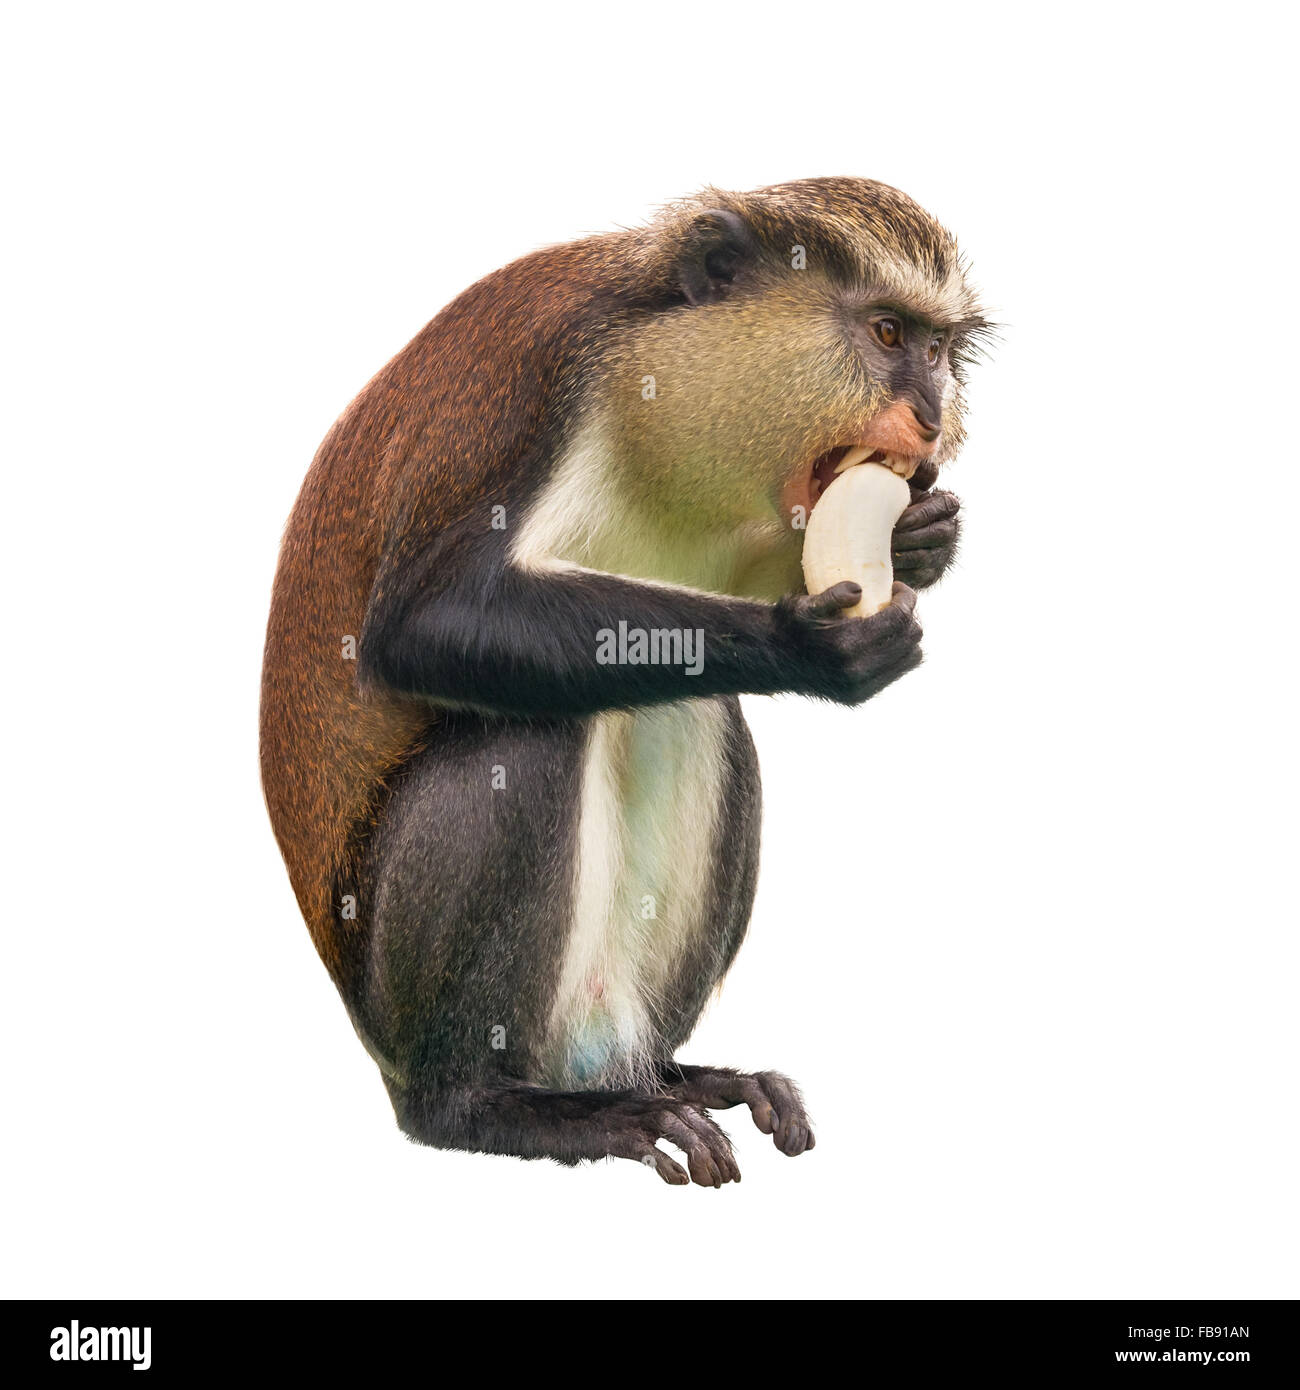 Monkey with a banana on a white background Stock Photo